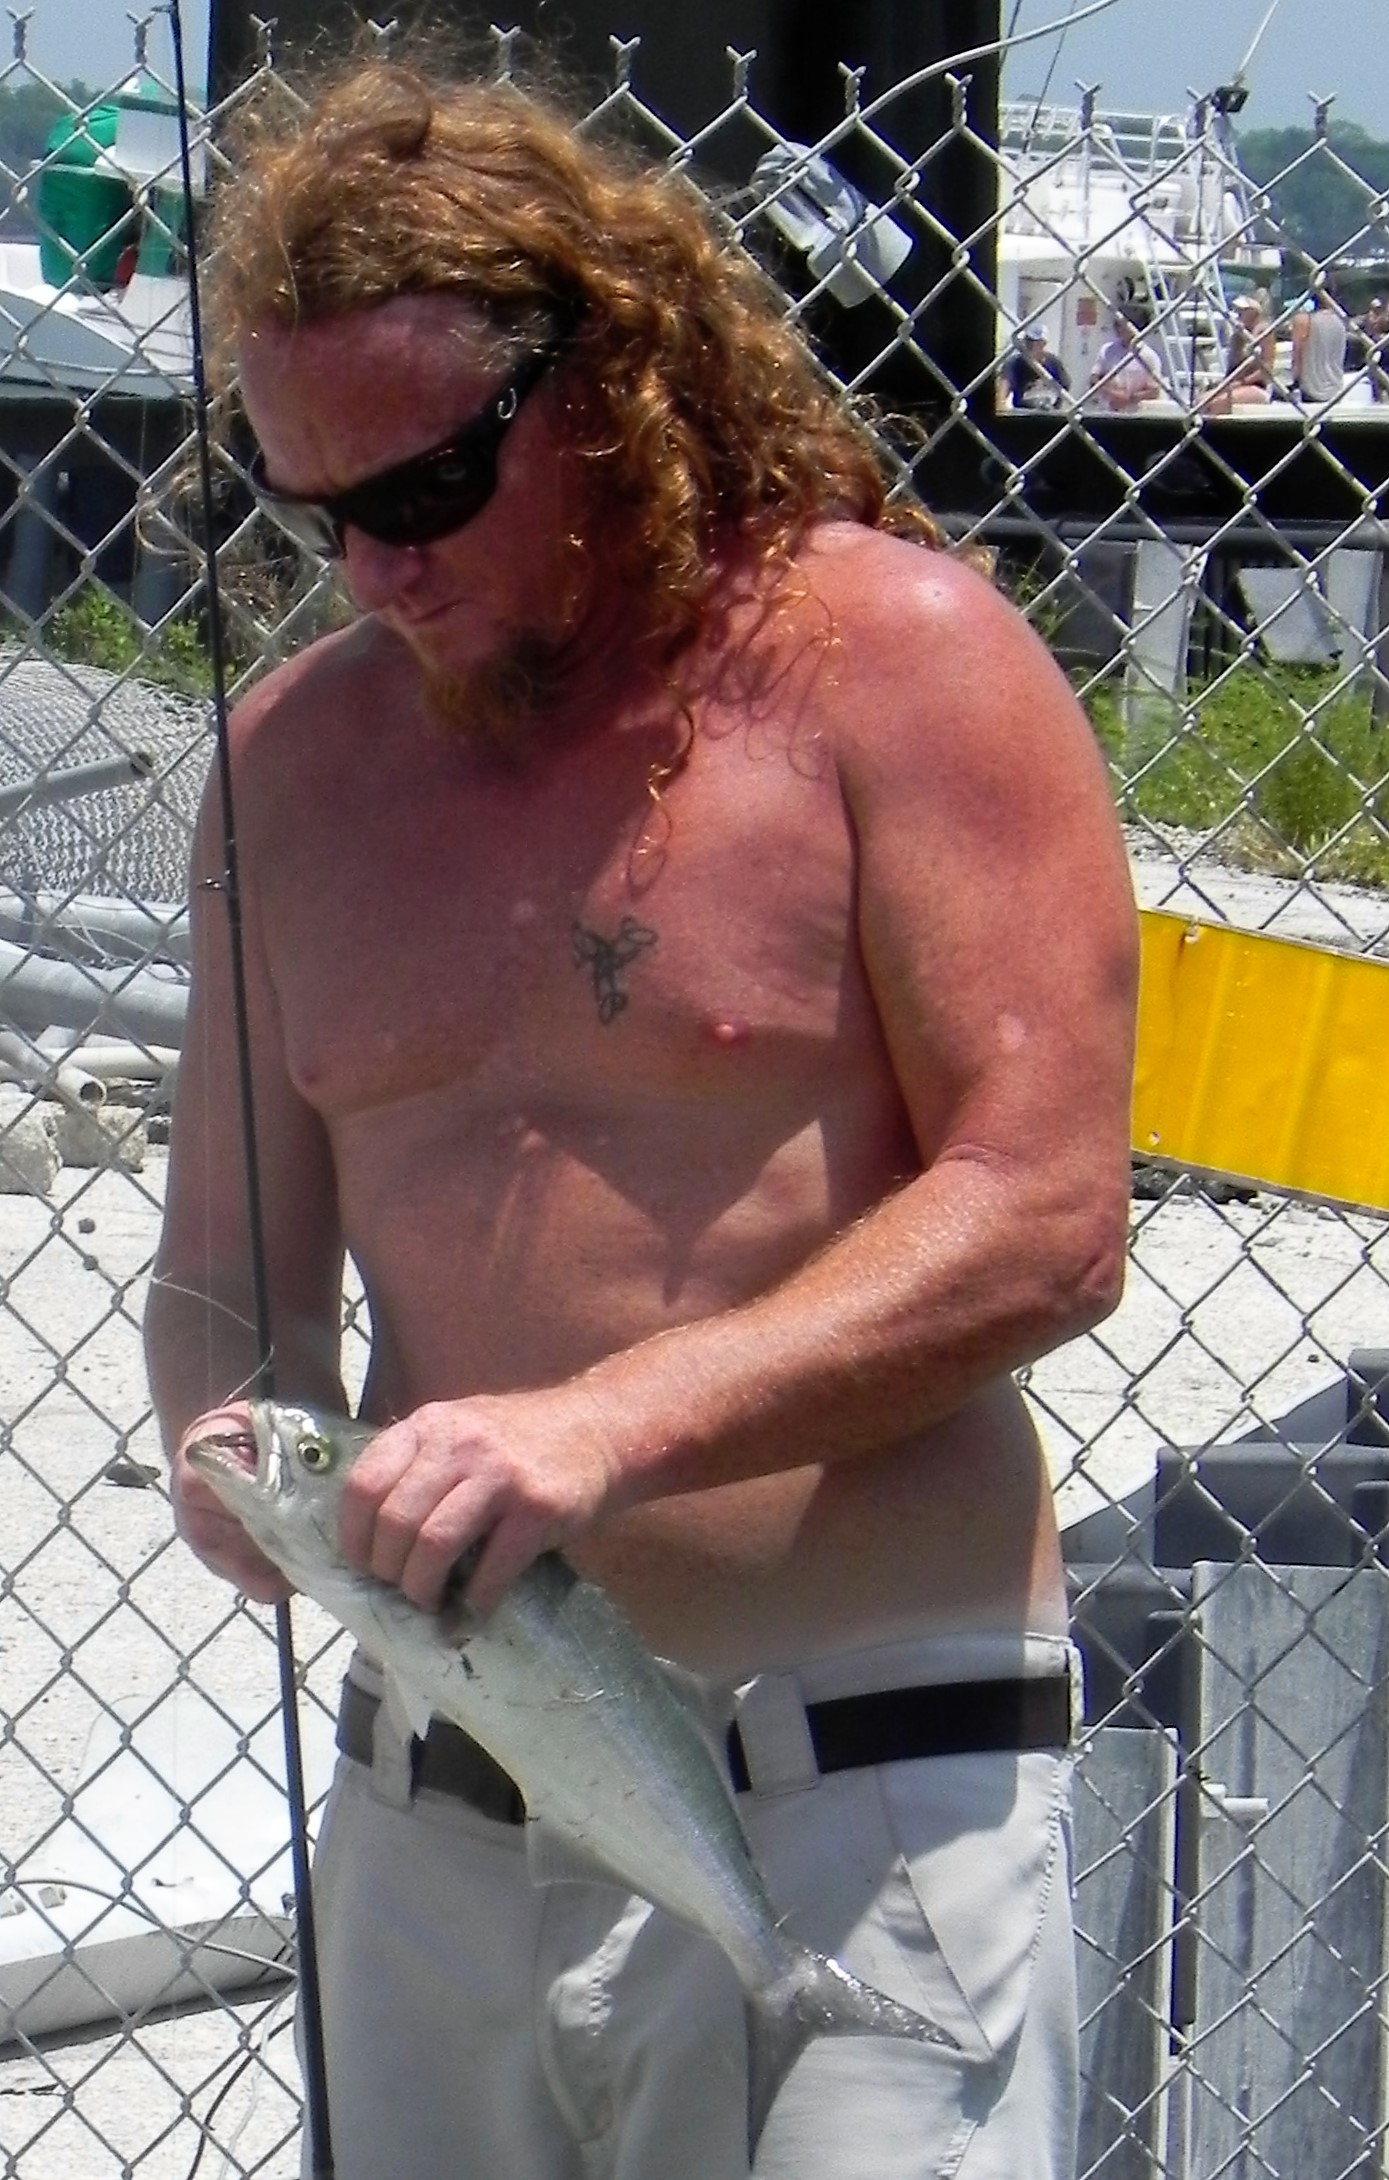 Jeremy Slaughter of Summerdale shows off a bluefish he caught in Perdido Pass.